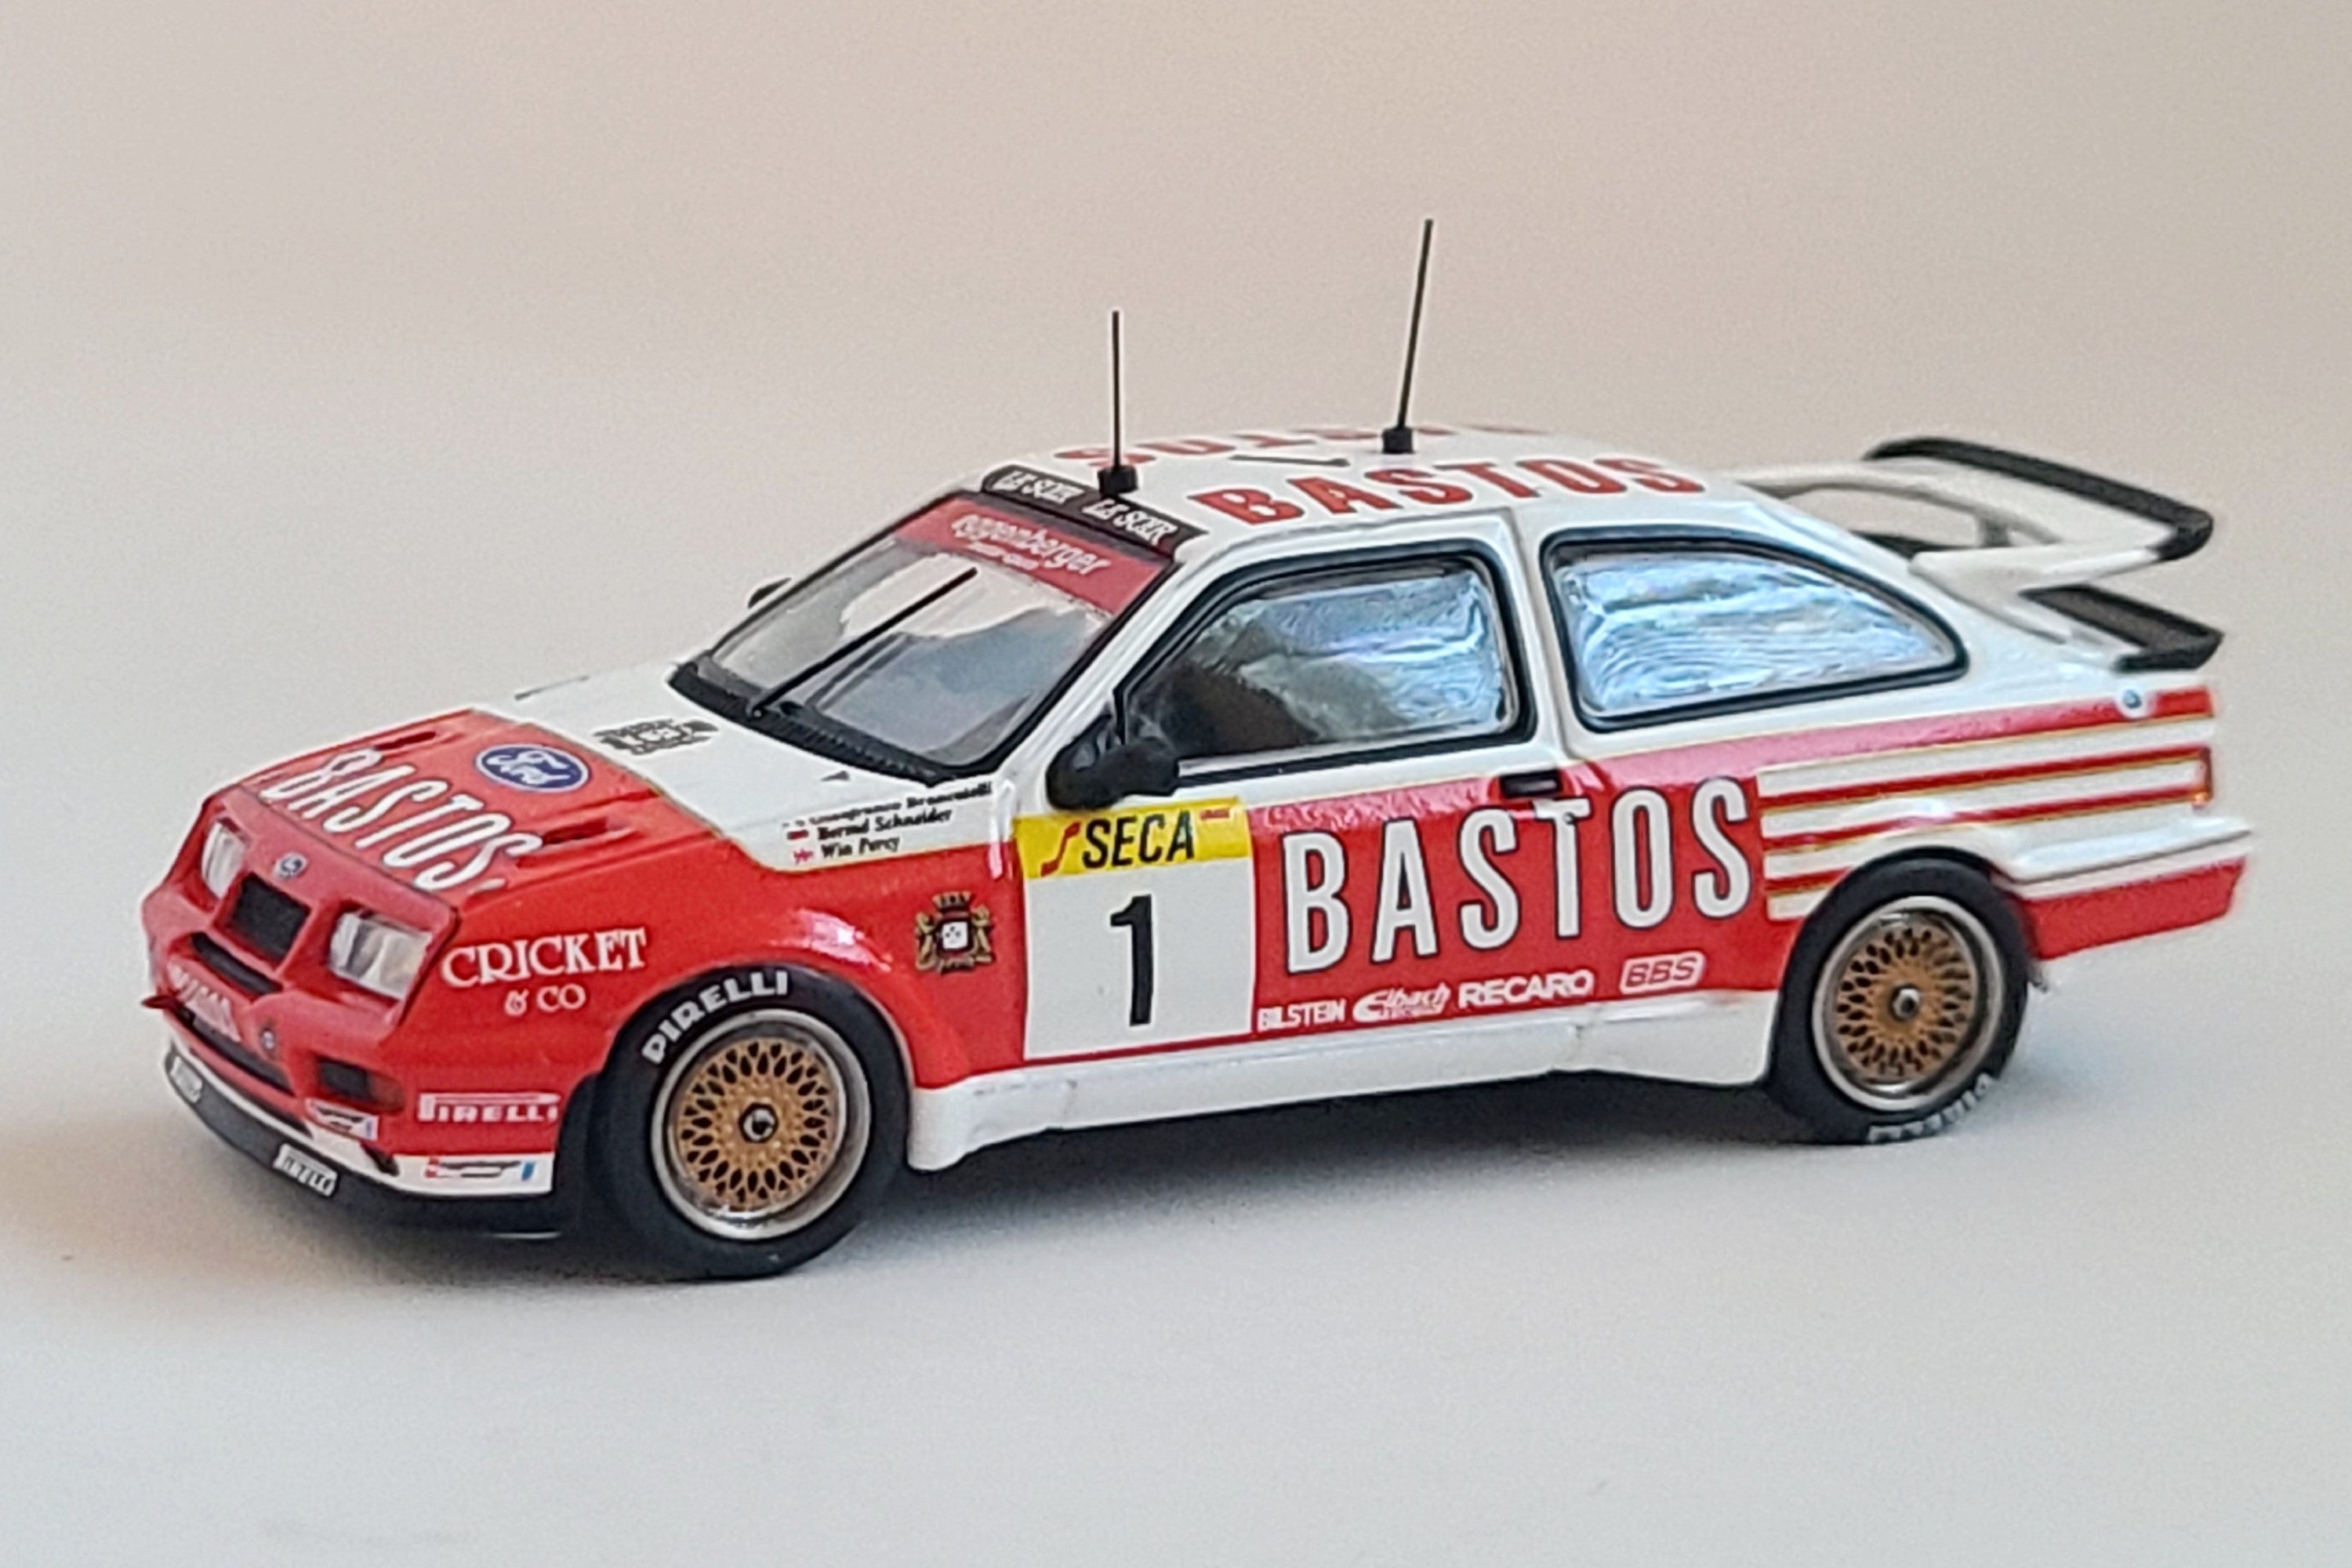 Ford Sierra RS500 Cosworth (1989 Spa 24 Hours Winner) | 1:64 Scale Premium Diecast Model Car by INNO64 | Front Quarter